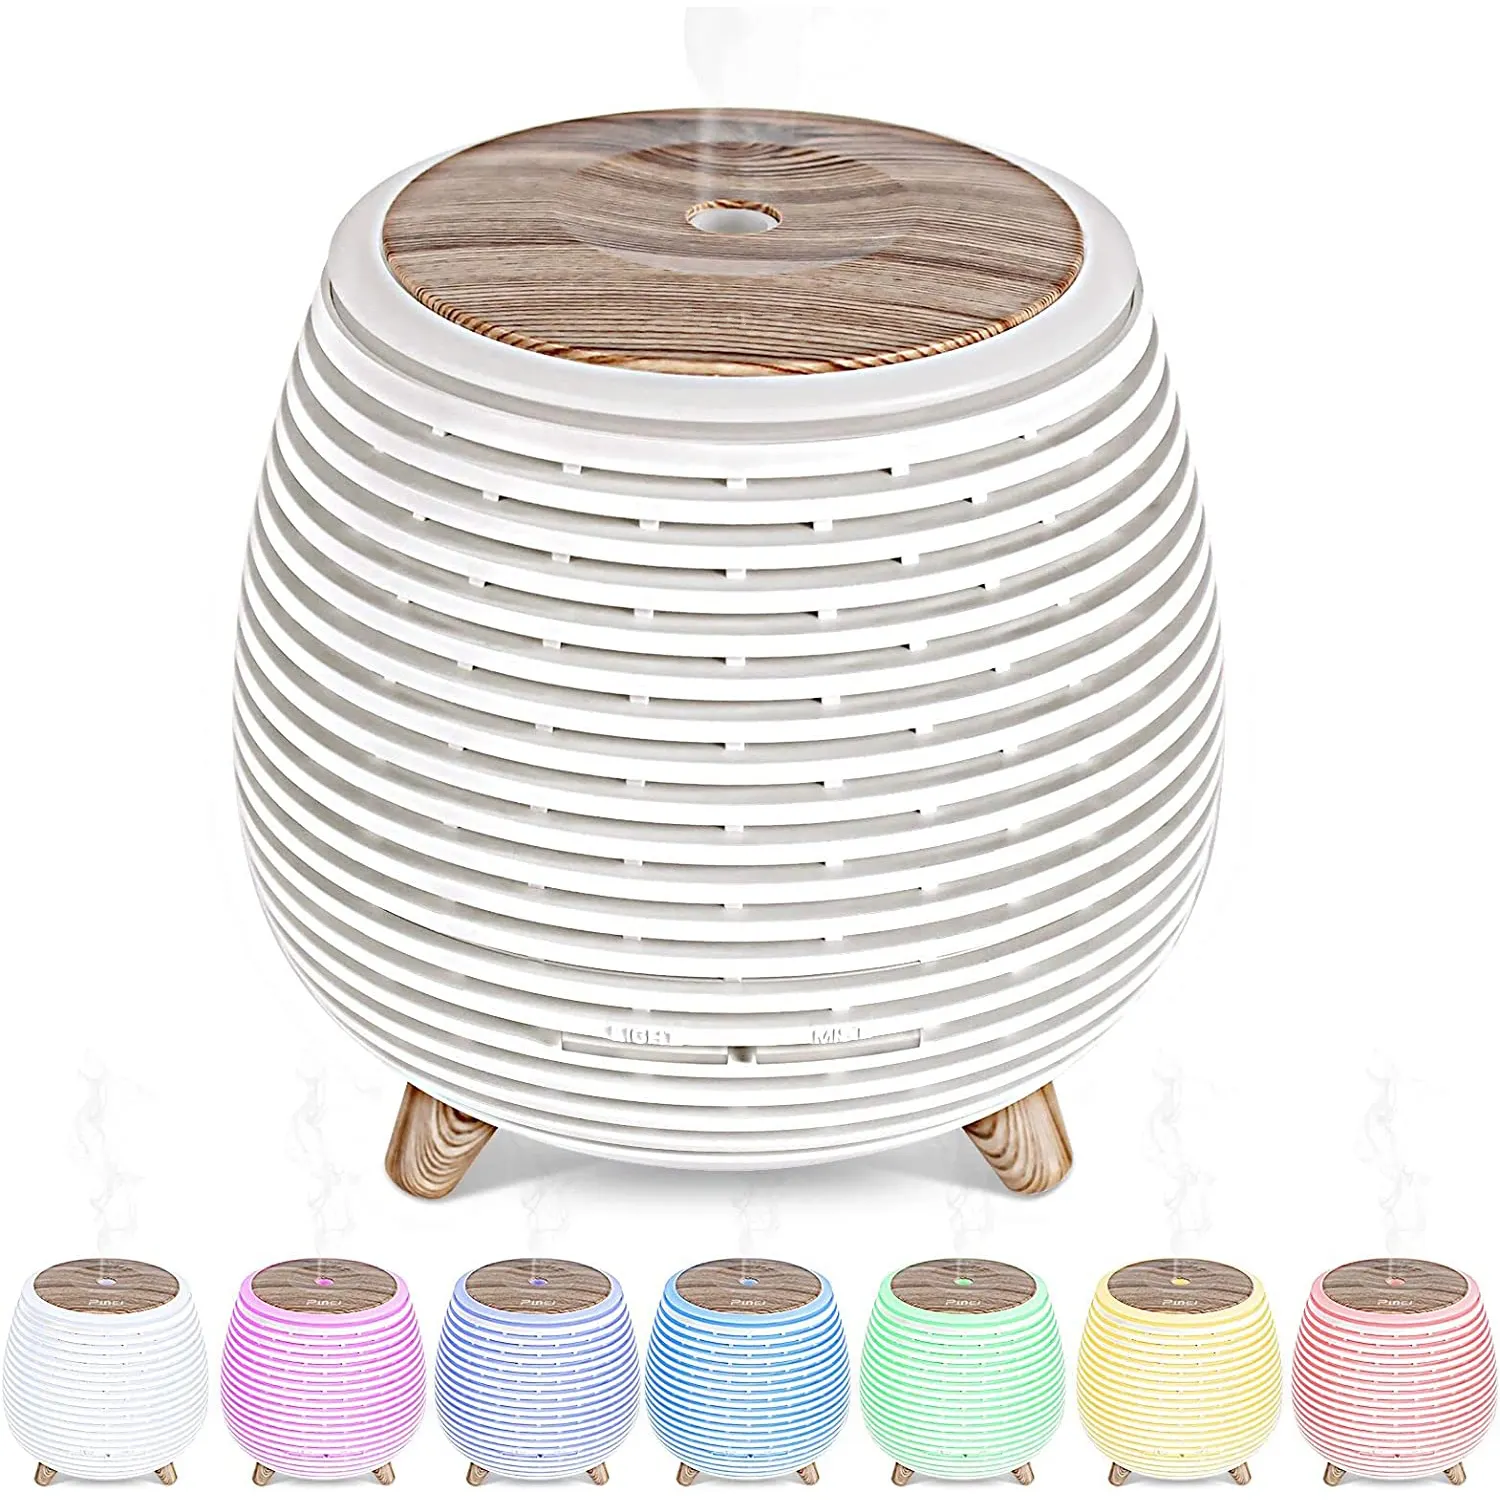 2023 Popular Hollow-Carved USB Ultrasonic Cool Mist Humidifier Portable 7 Color LED lights Aromatherapy Essential Oil Diffuser